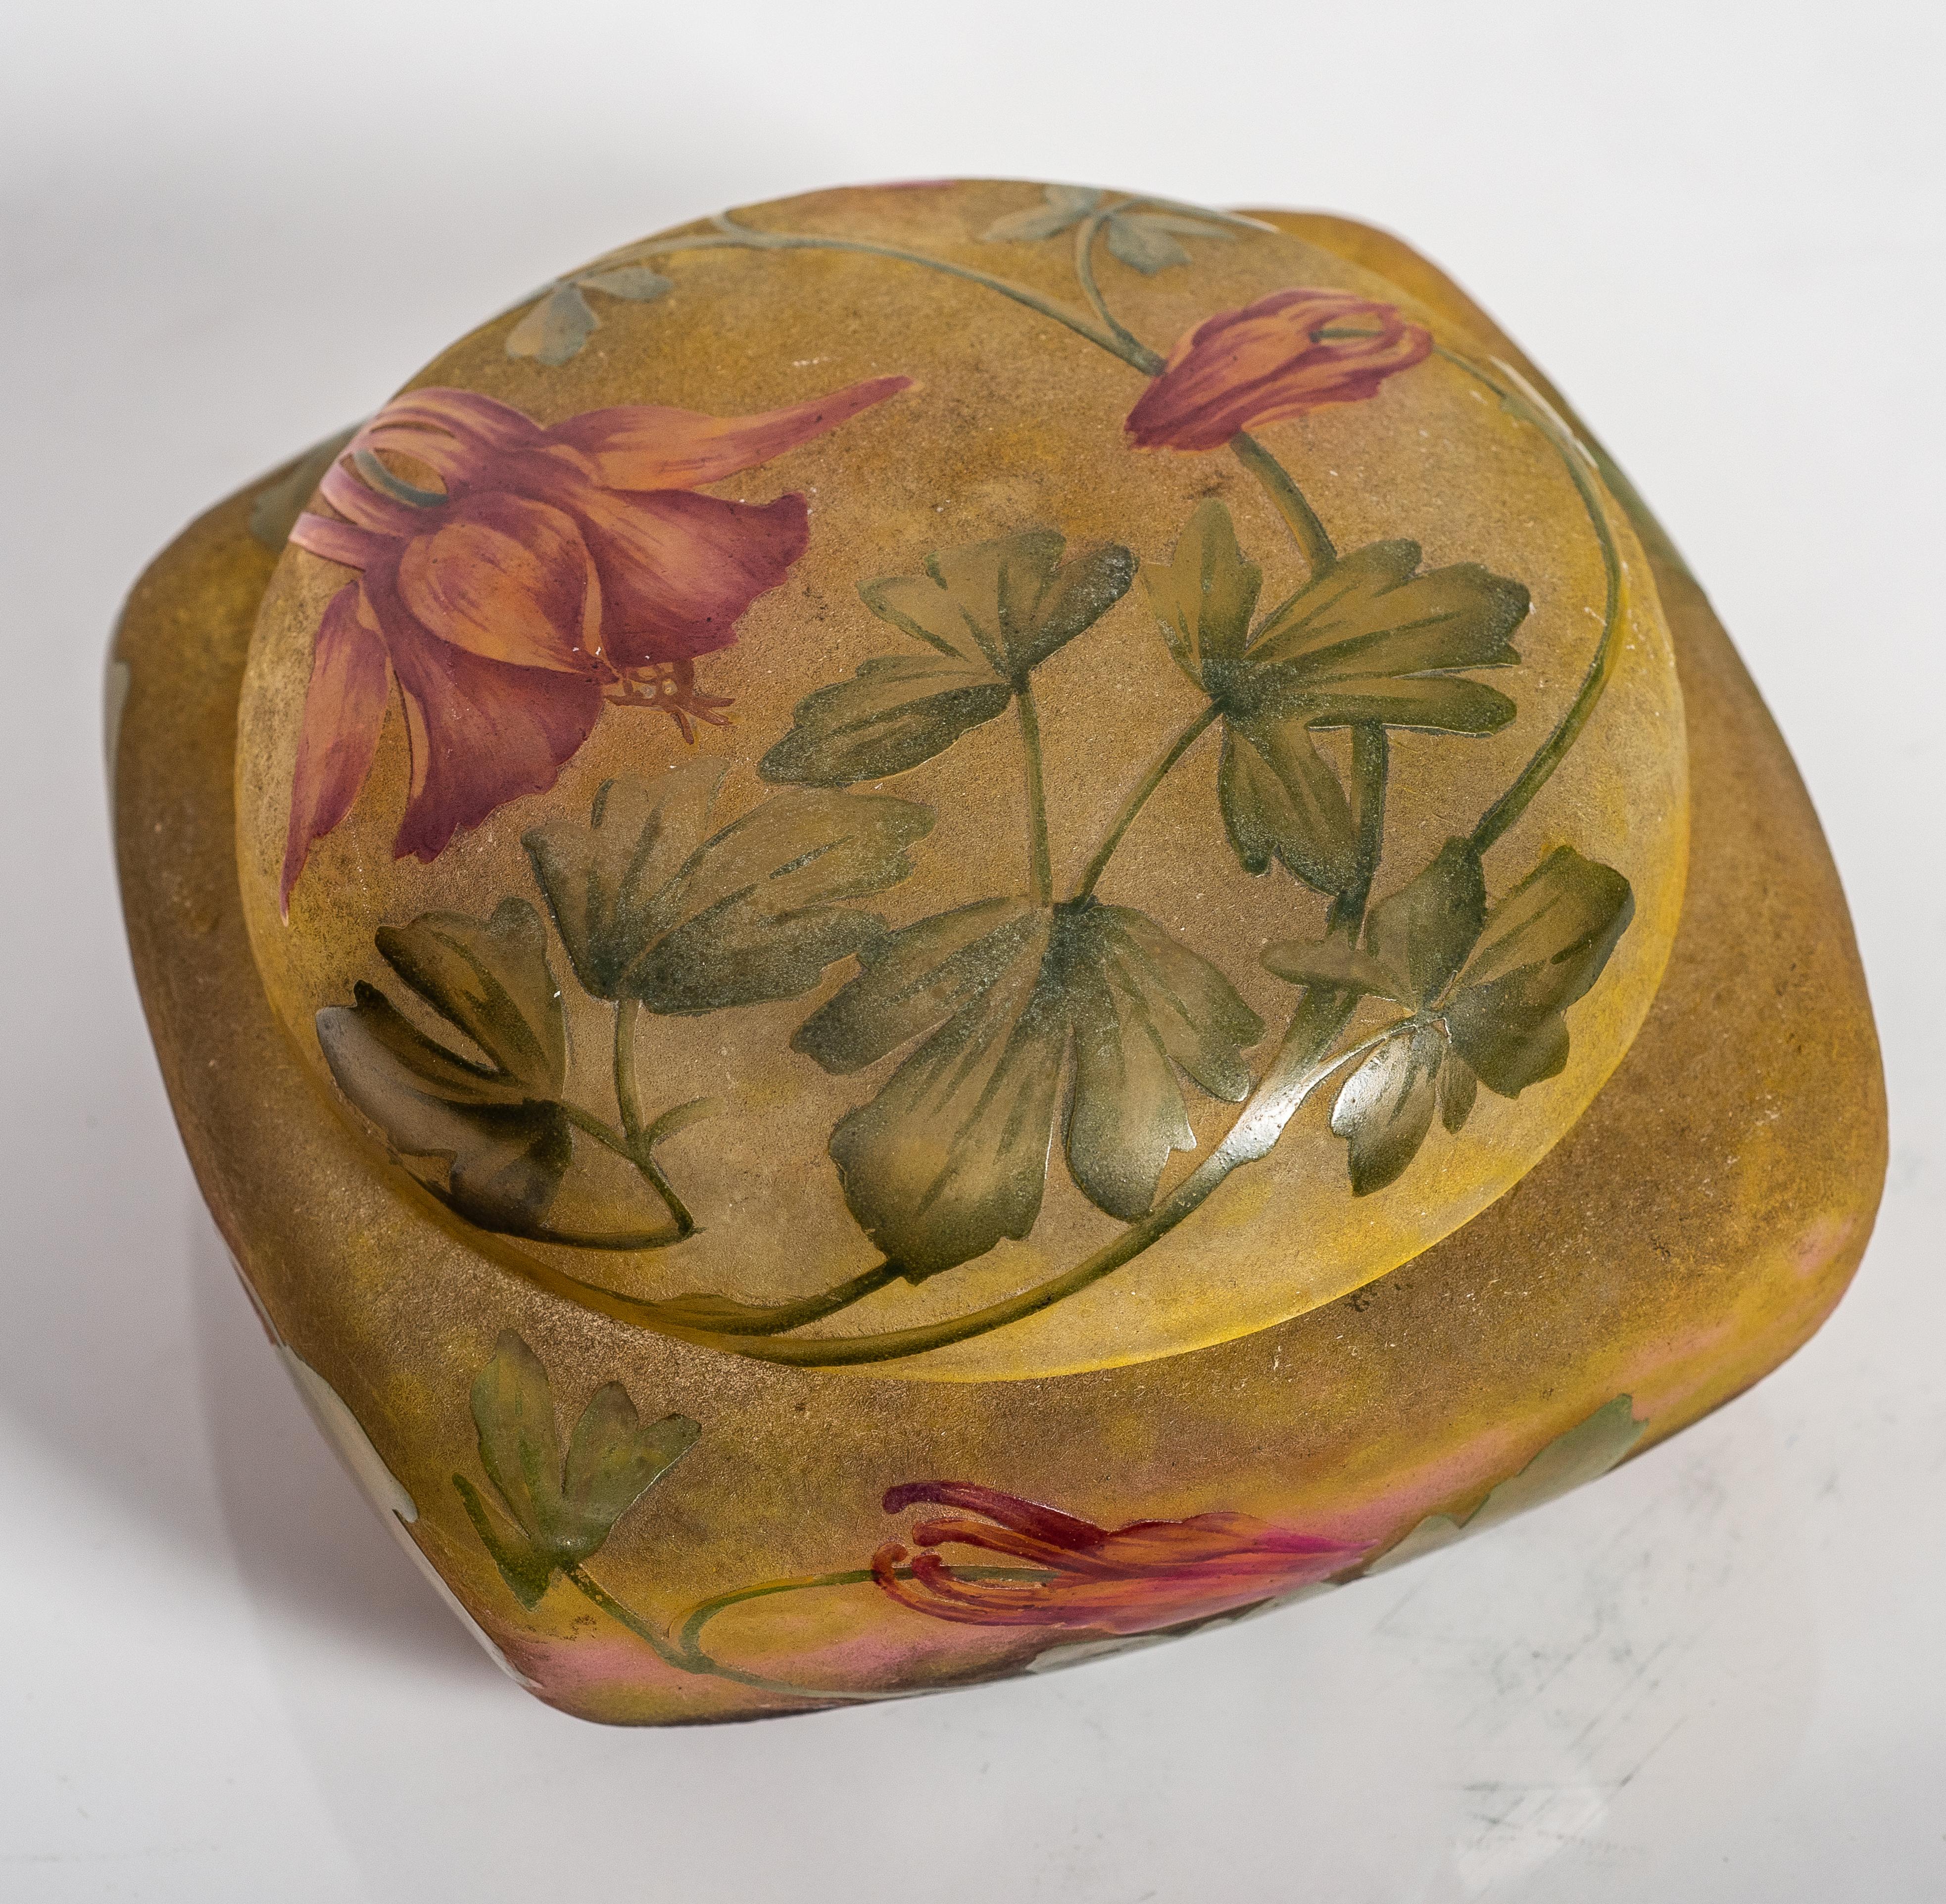 Daum Nancy enamelled and internally decorated glass box and cover, 
France, circa 1900-1910
decorated with red wild flowers and green leaves on a mottled green and brown ground.
signed with cameo mark Daum Nancy with Lorraine cross
DIMENSIONS